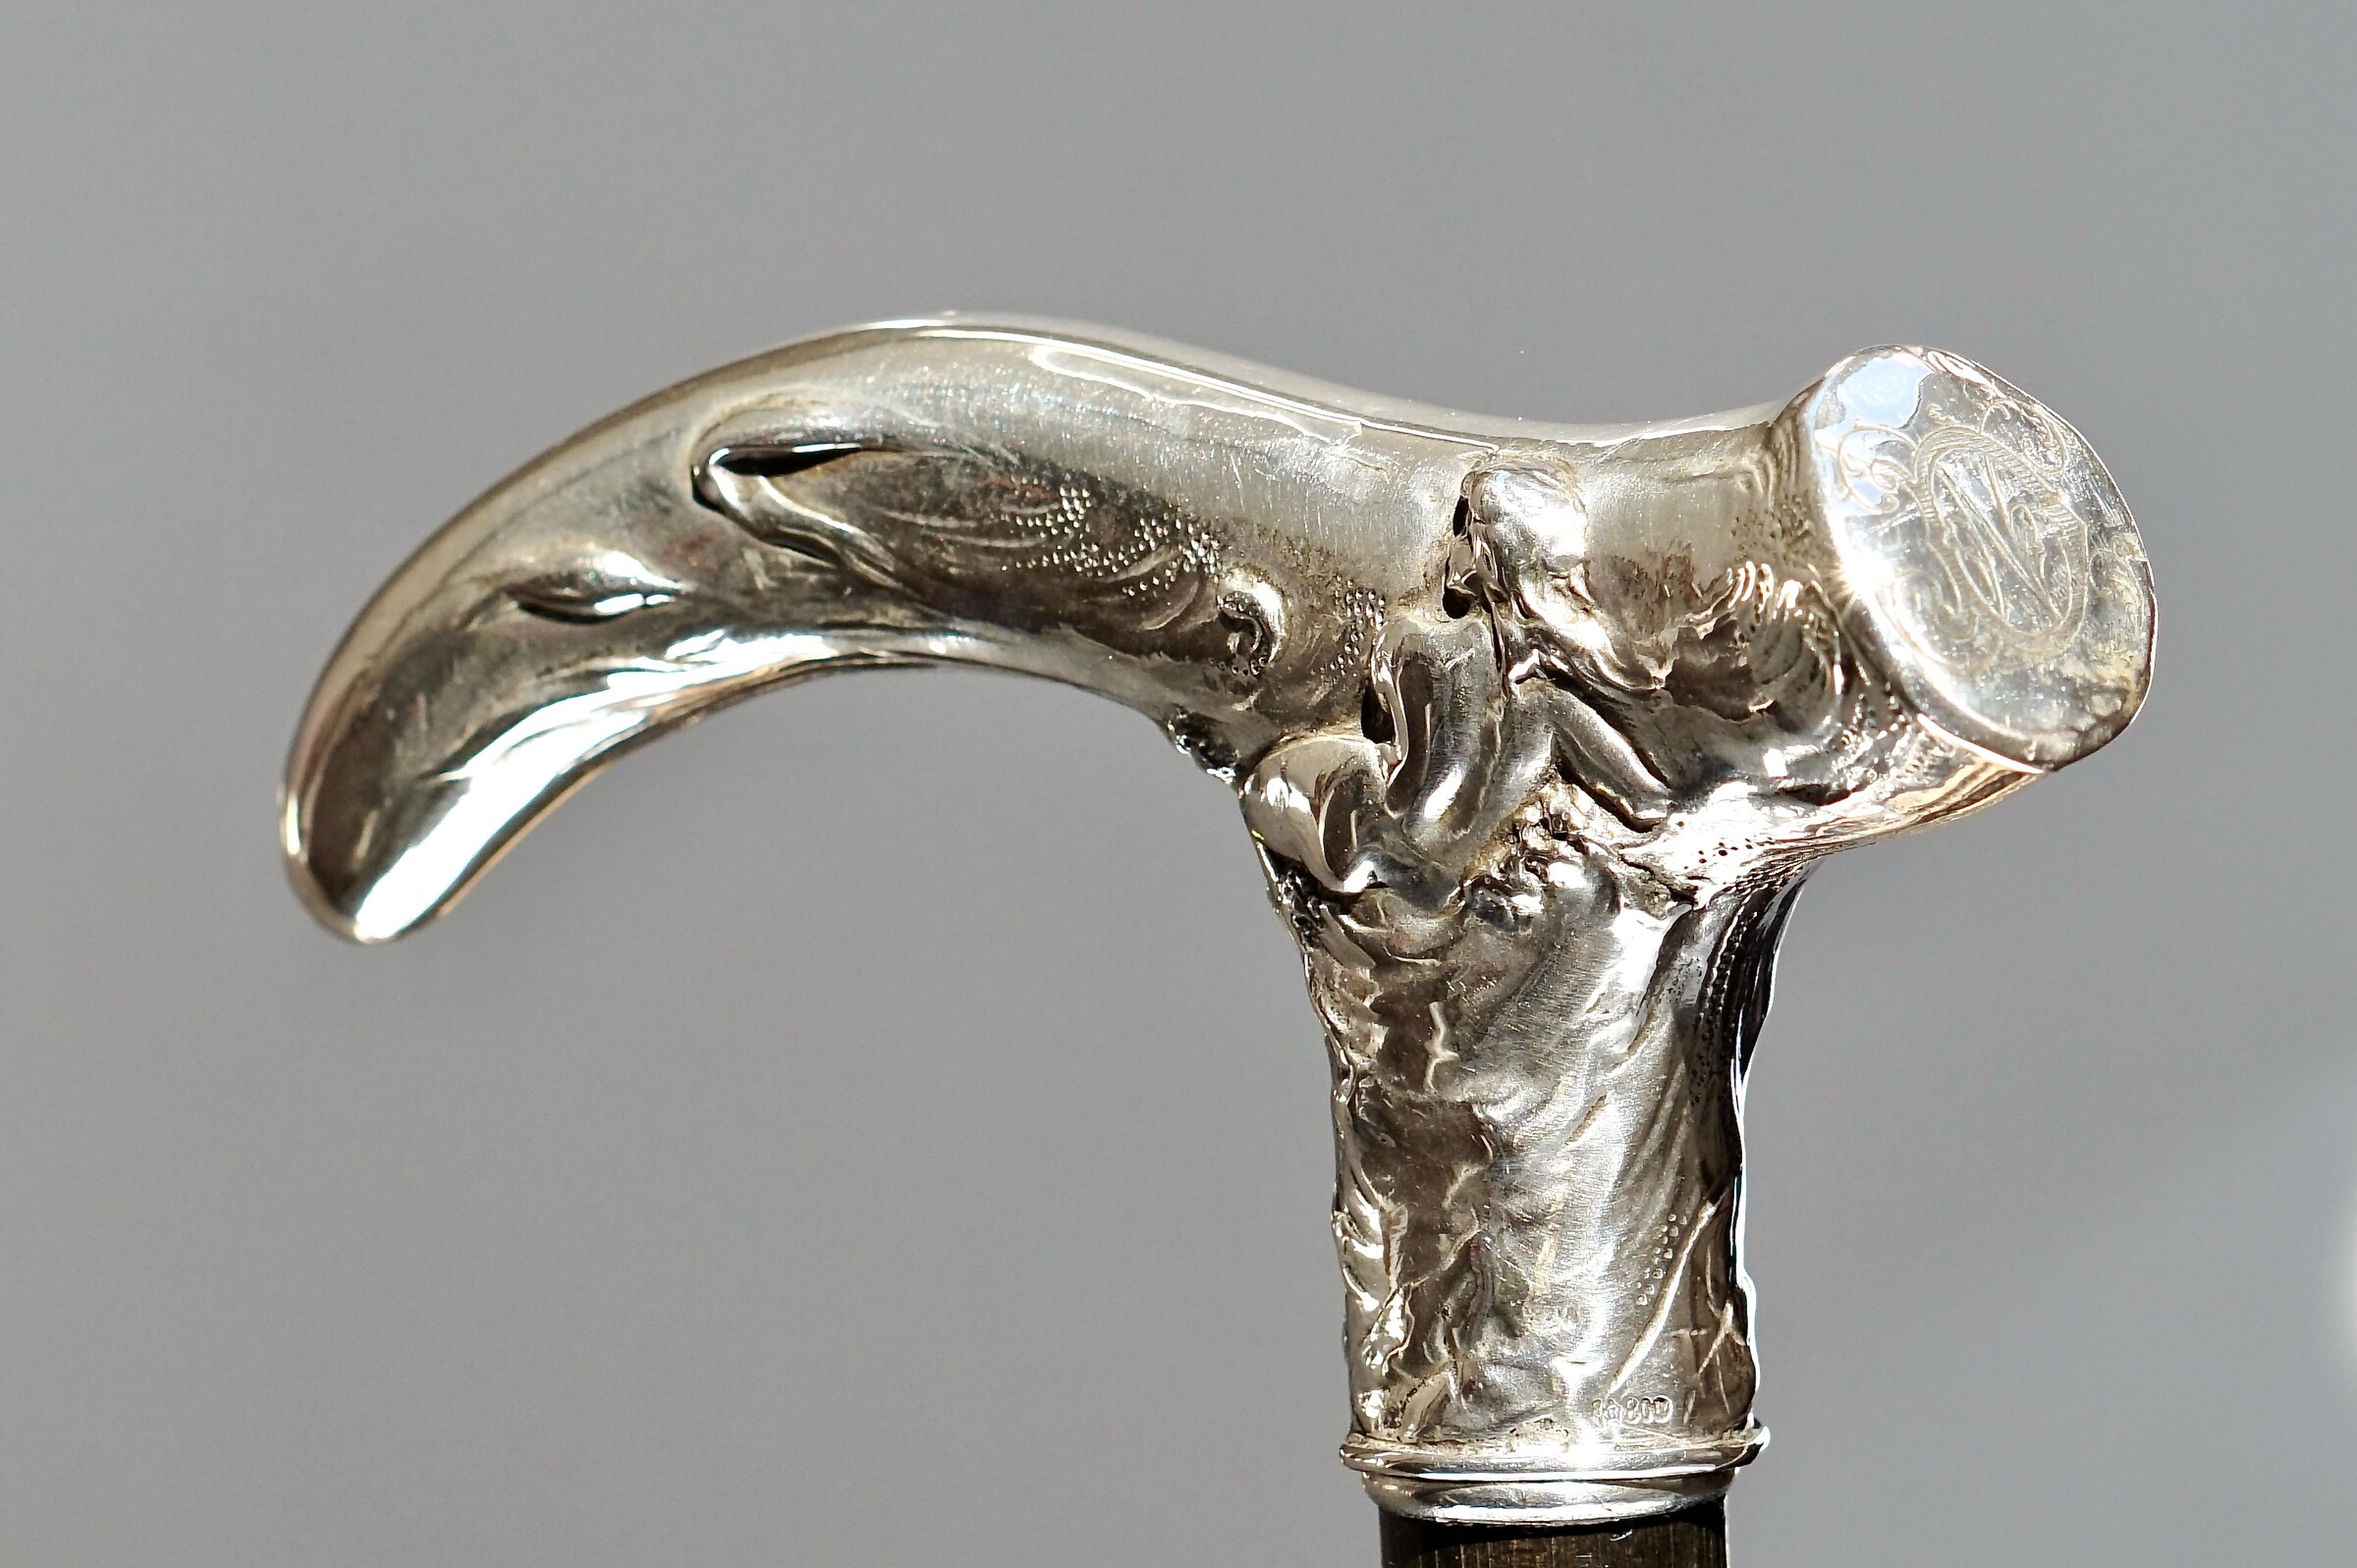 Maiden and Flowers, Art Nouveau Walking stick. Germany, ca. 1900